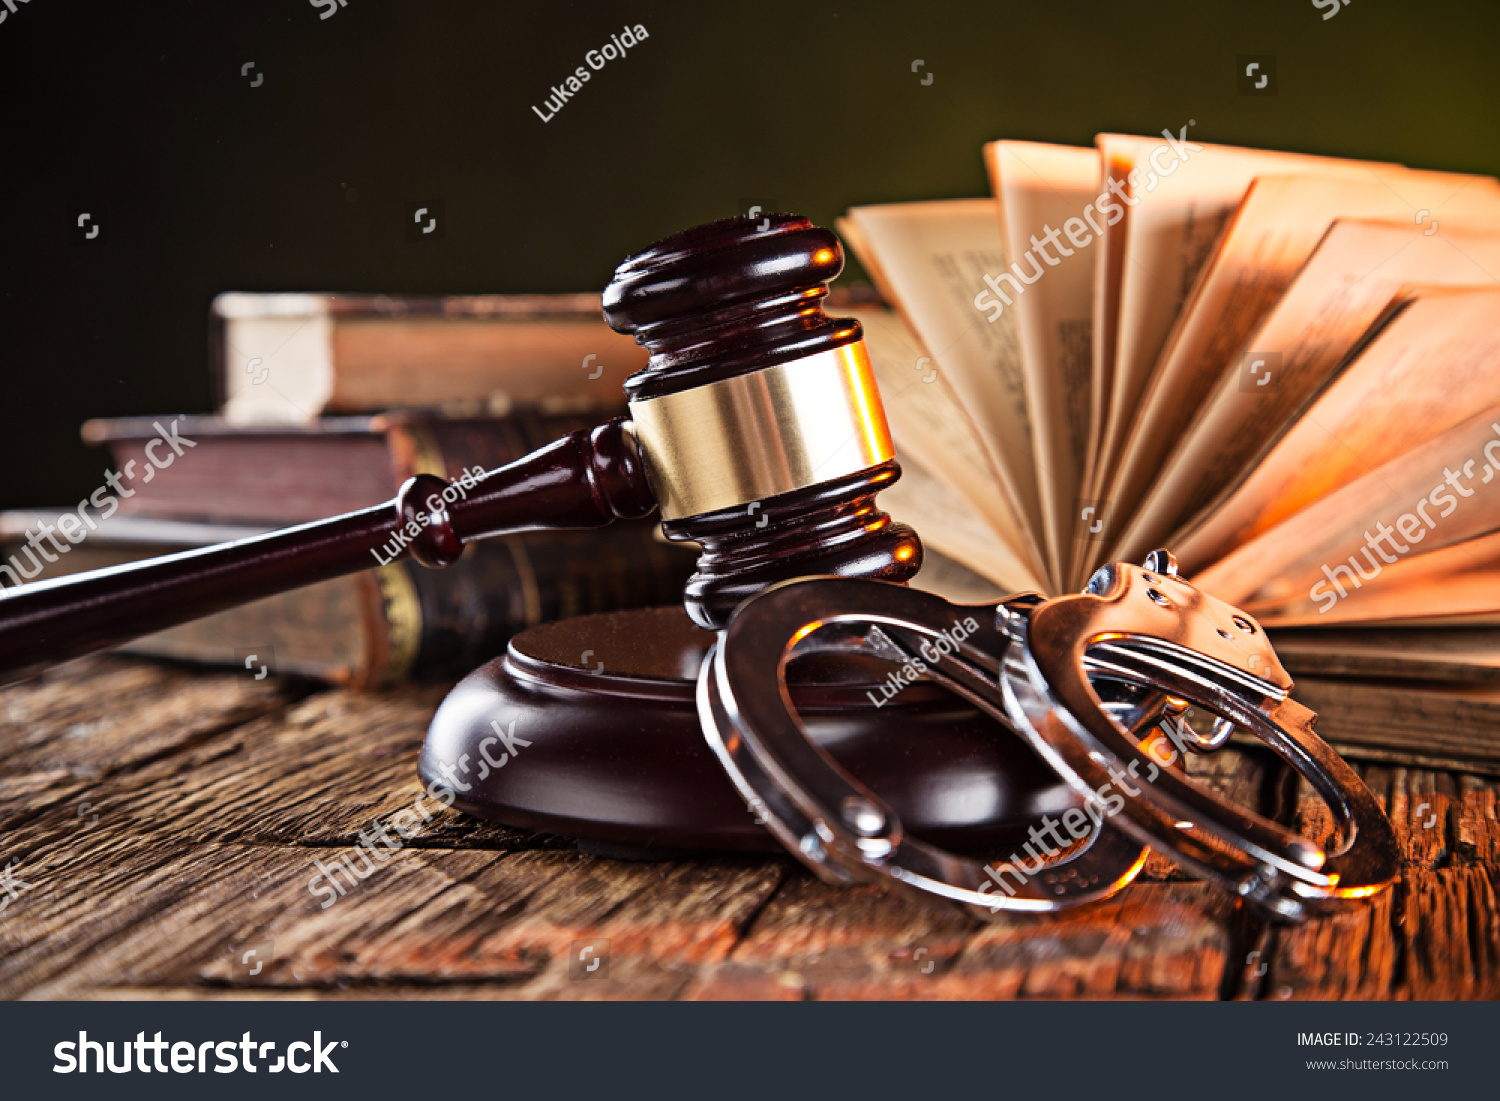 Wooden gavel and books on wooden table, law concept #243122509